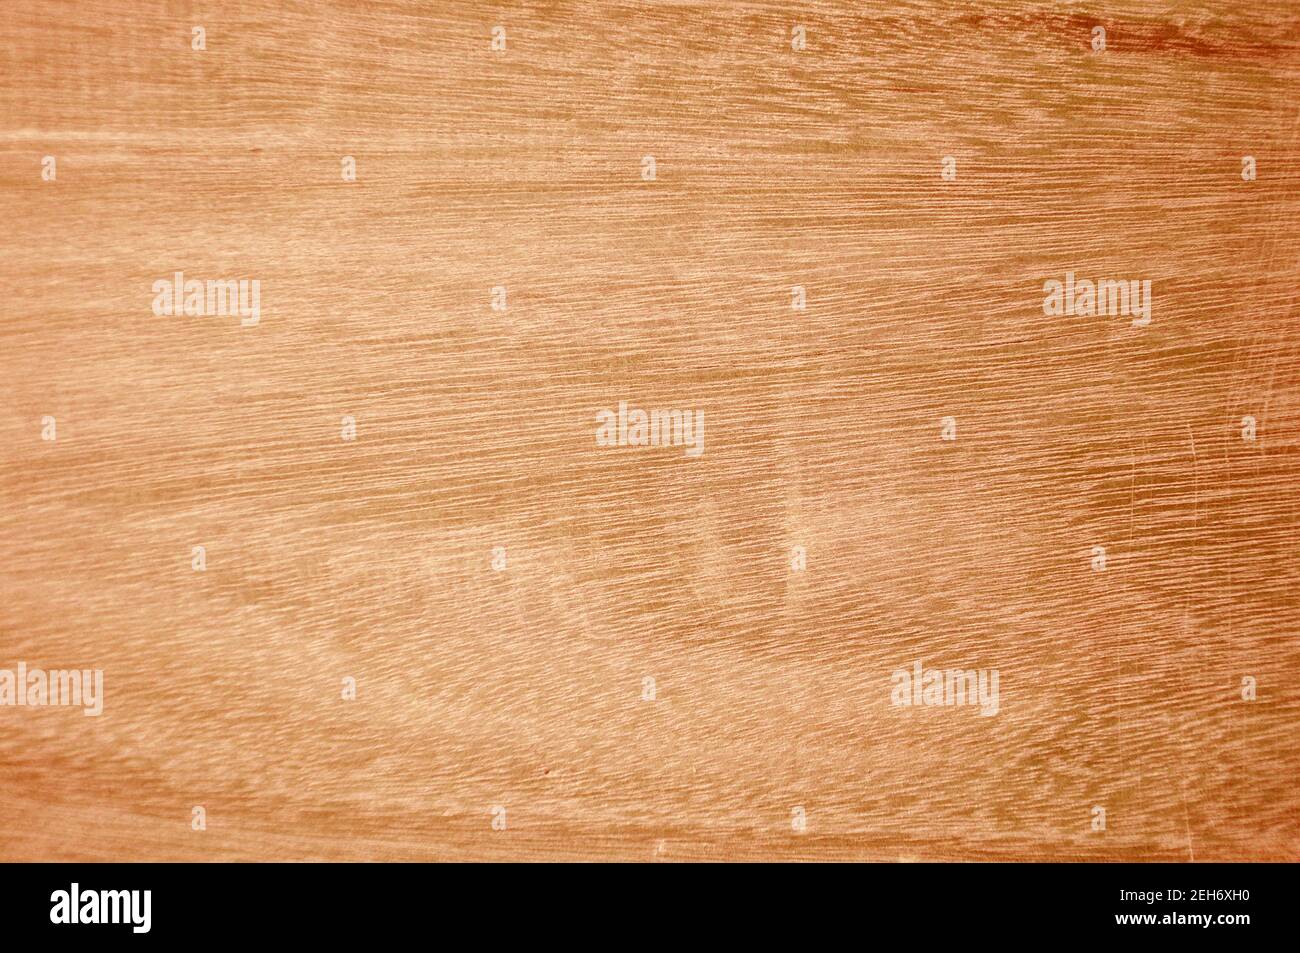 wood plank brown grain texture, wooden table and floor, wood planks wall background Stock Photo